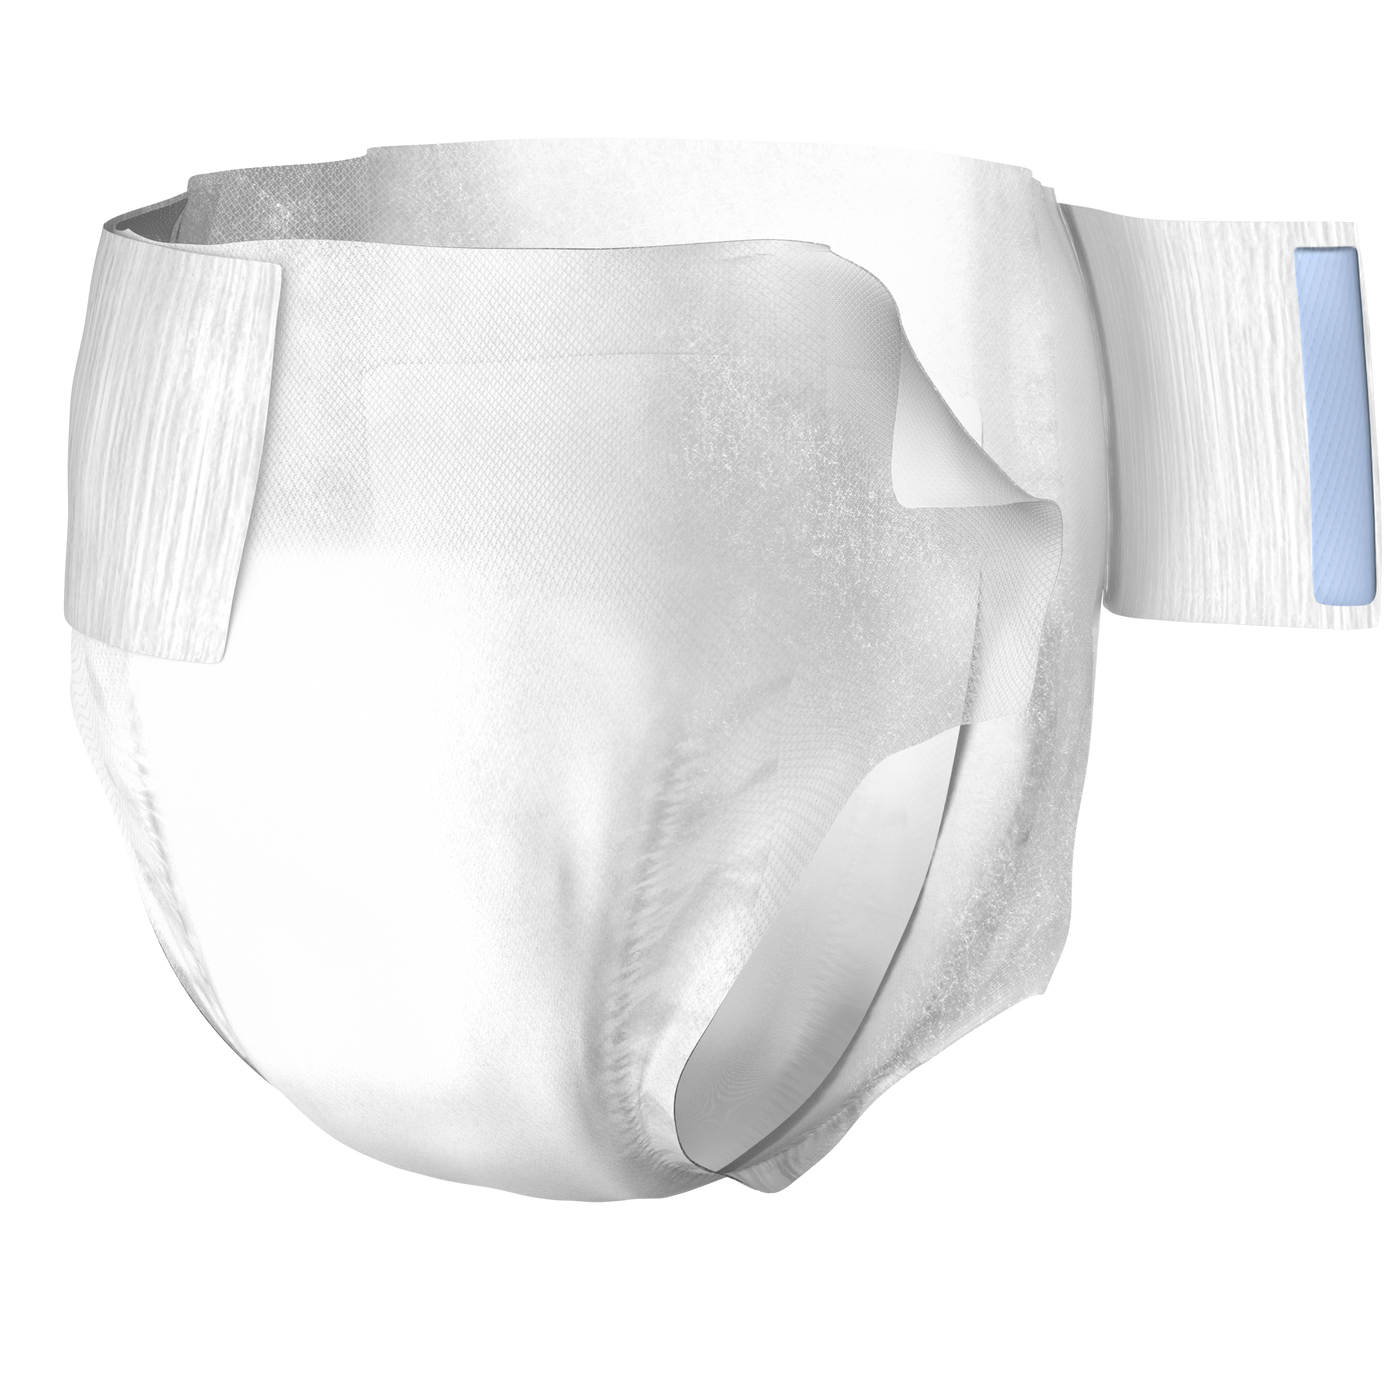 Prevail Air Ultimate Plus Size Adult Briefs